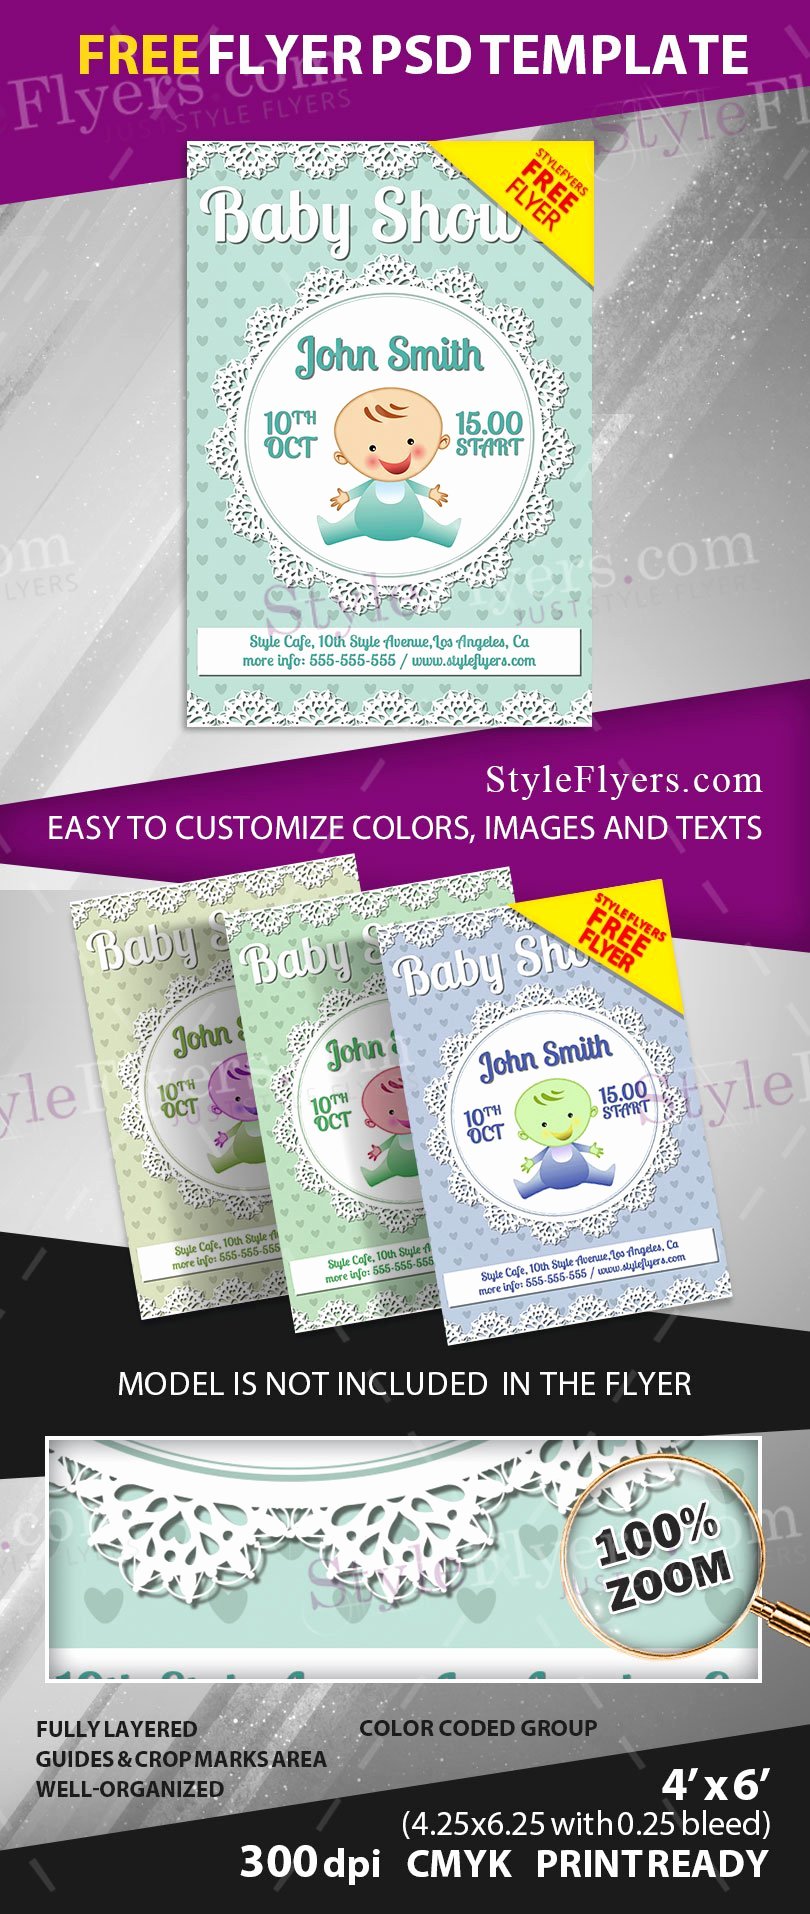 Baby Shower Flyer Template Beautiful Baby Shower Free Psd Flyer Template Free Download